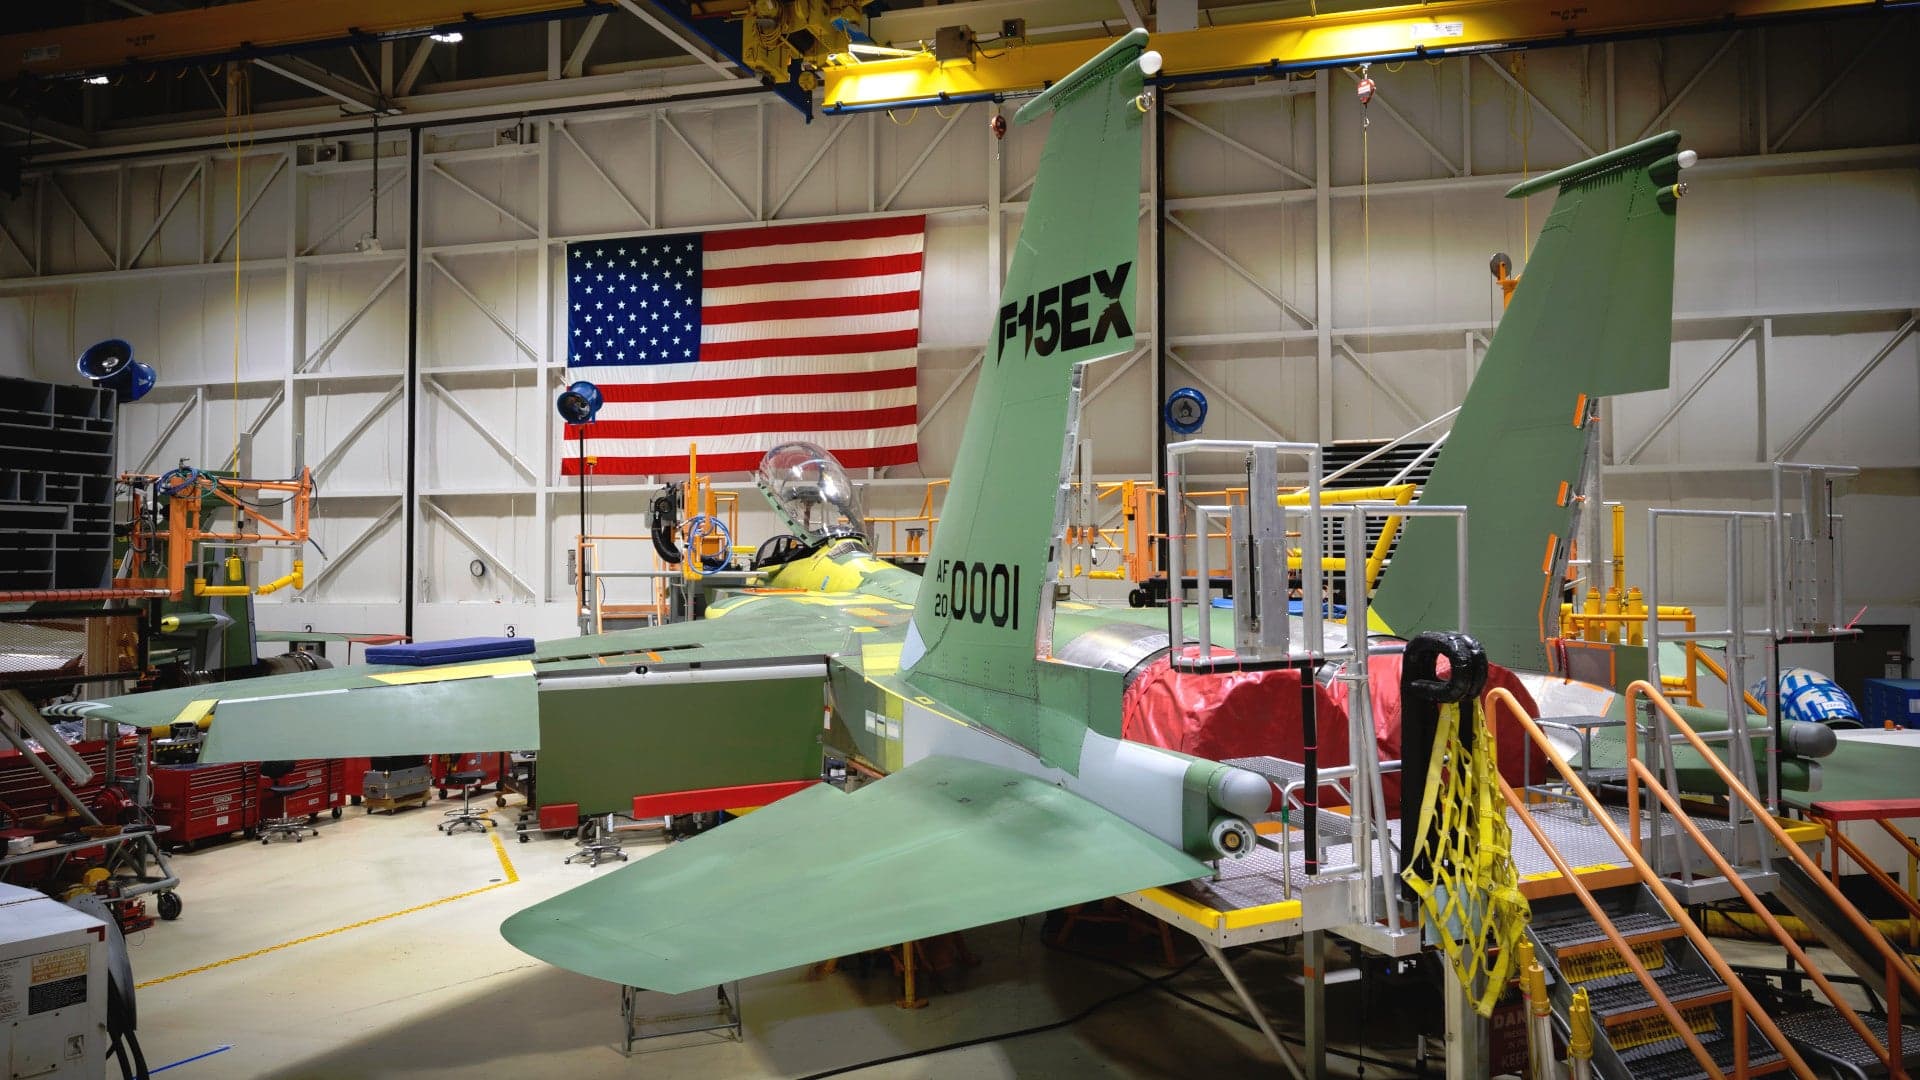 Here Is Our First Look At One Of Boeing’s New F-15EX Eagle Fighter Jets For The Air Force